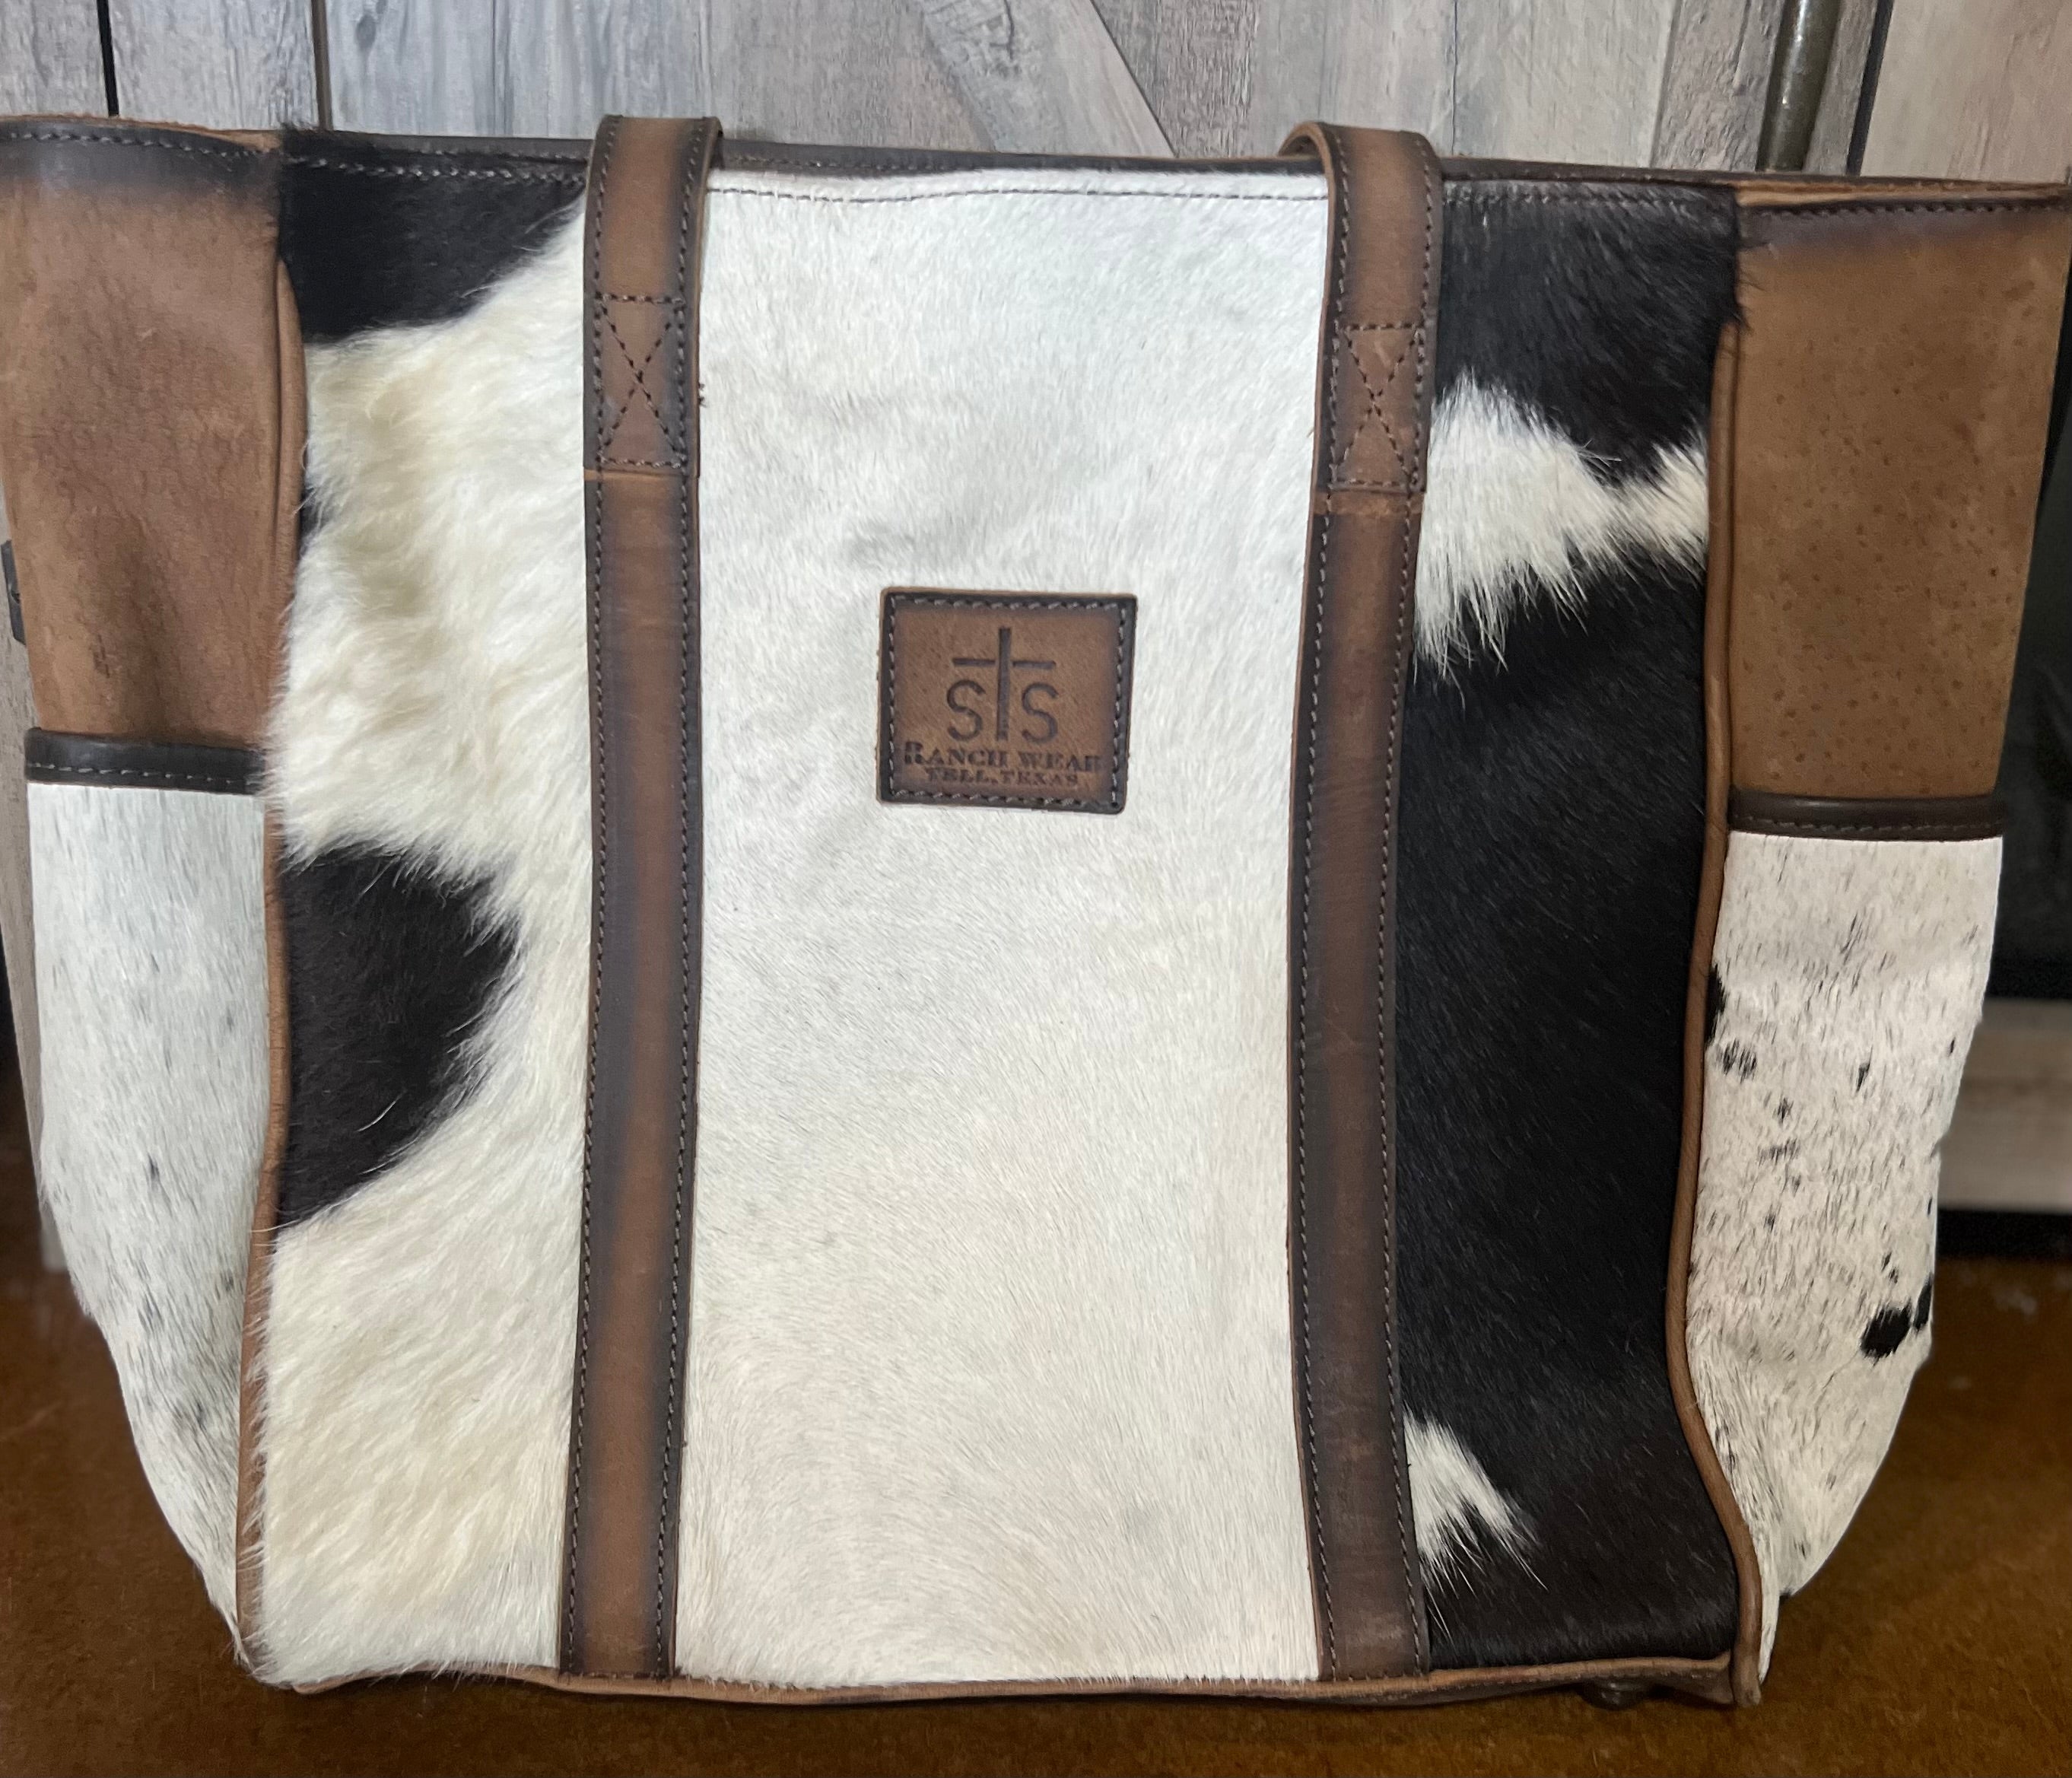 Ranchy Life Cowhide Heritage Tote Fun Funky Leather sTs Ranchwear closeup view of hide